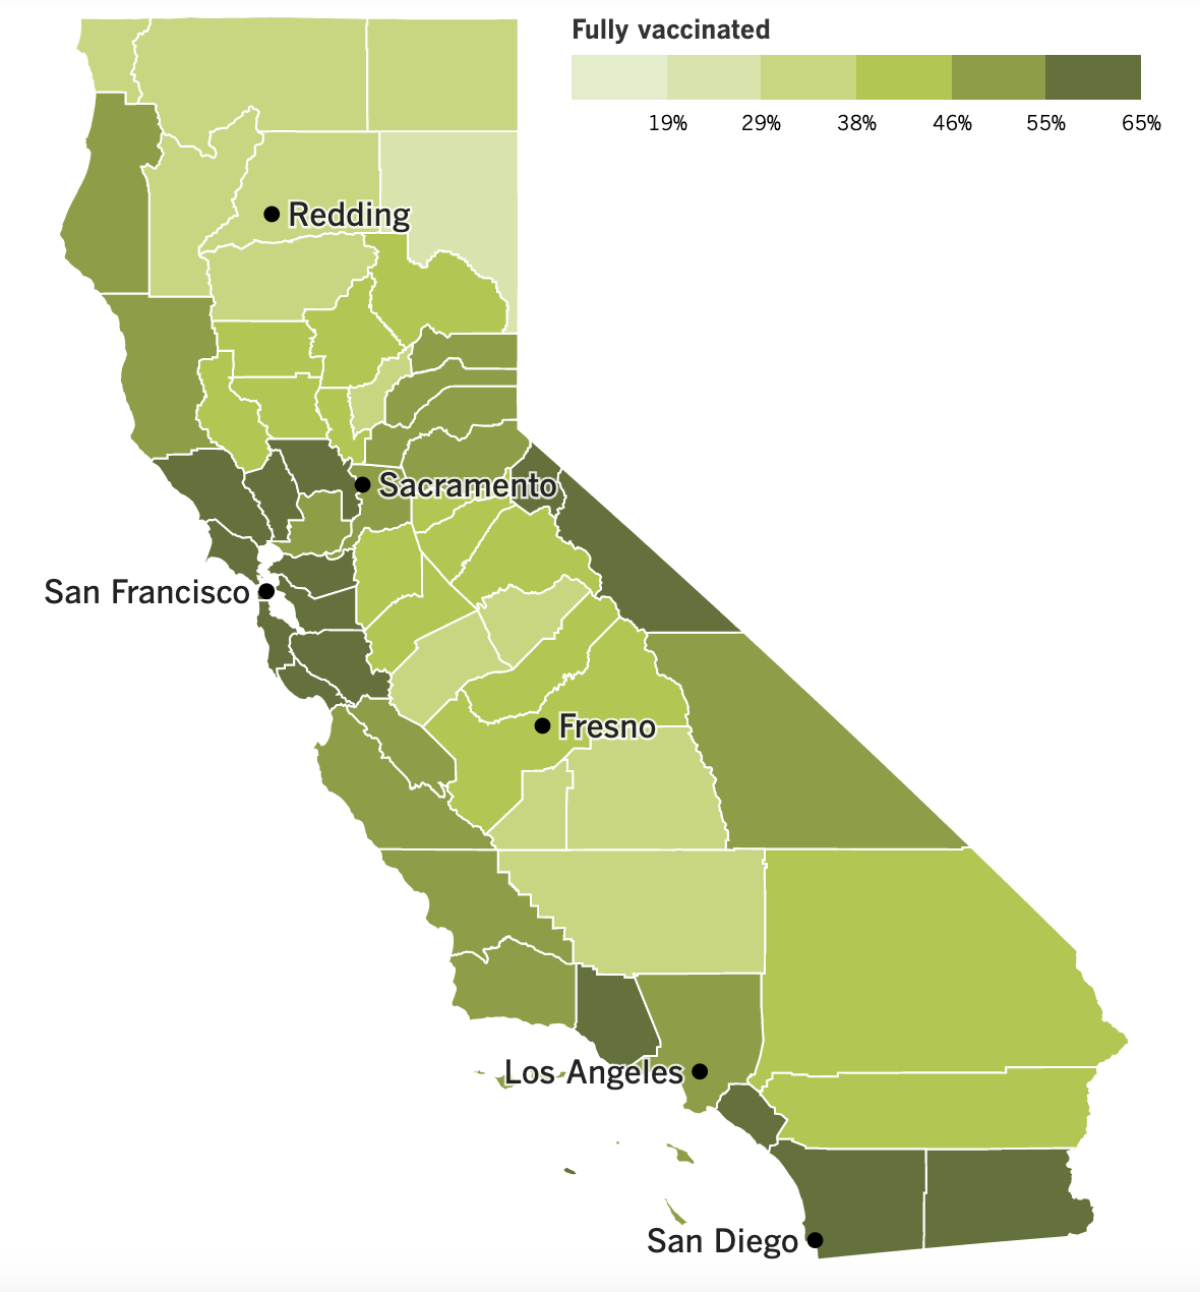 A map of California showing COVID-19 vaccination rates by county.